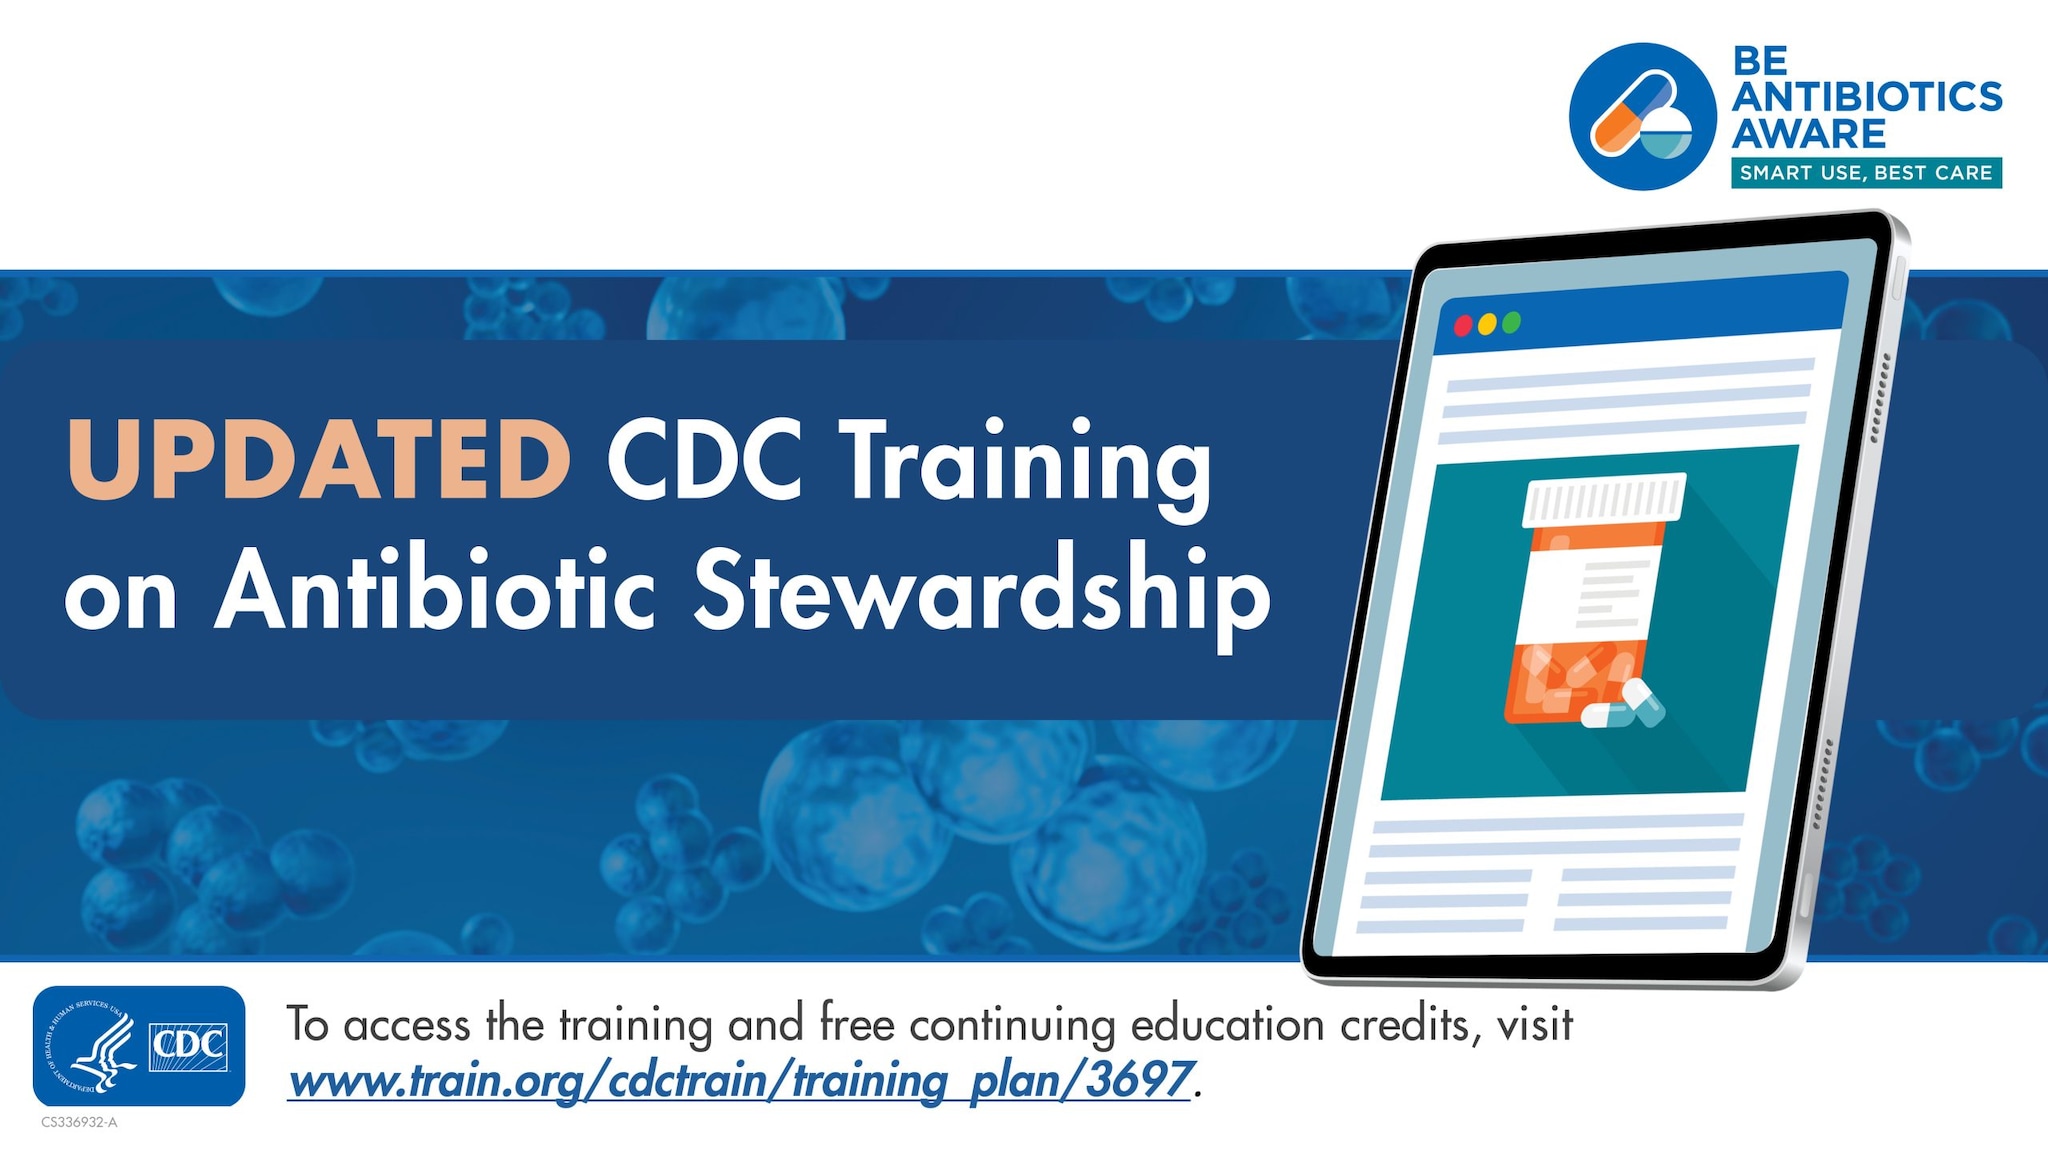 Updated CDC Training on Antibiotic Stewardship with free CE Credits at https://www.train.org/cdctrain/training_plan/3697